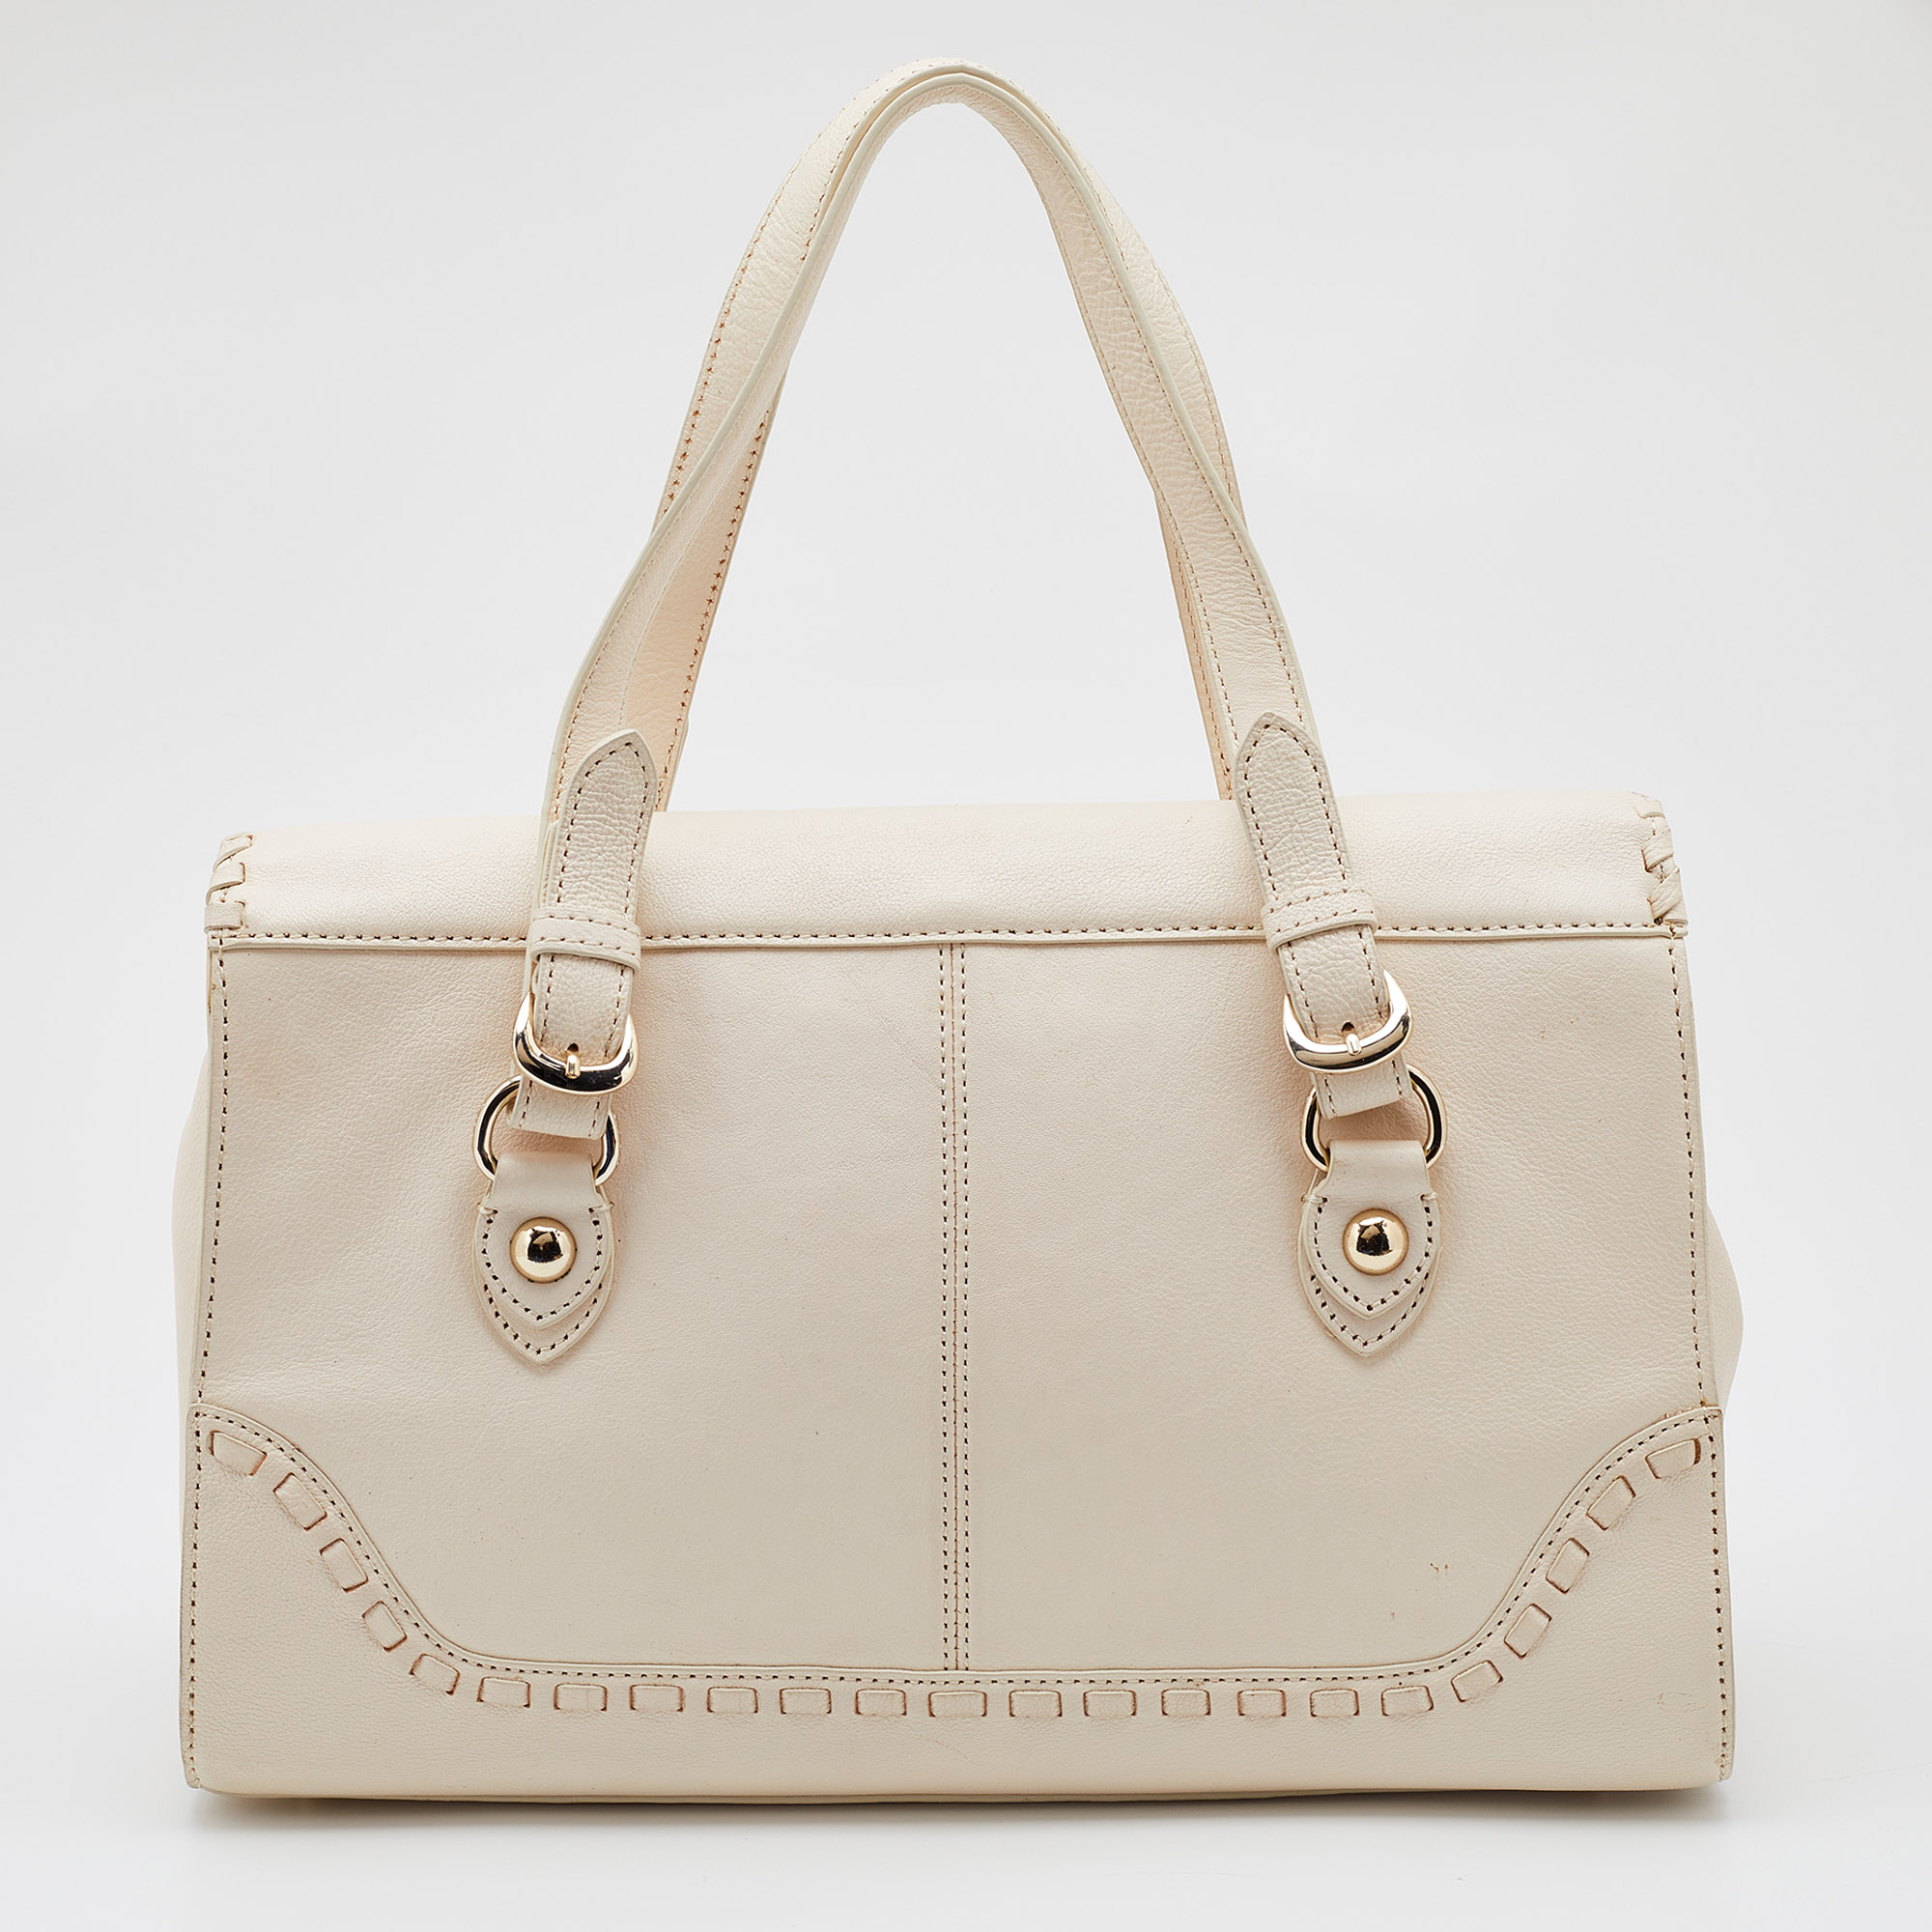 Dkny Off White Leather Flap Whipstitch Trim Tote